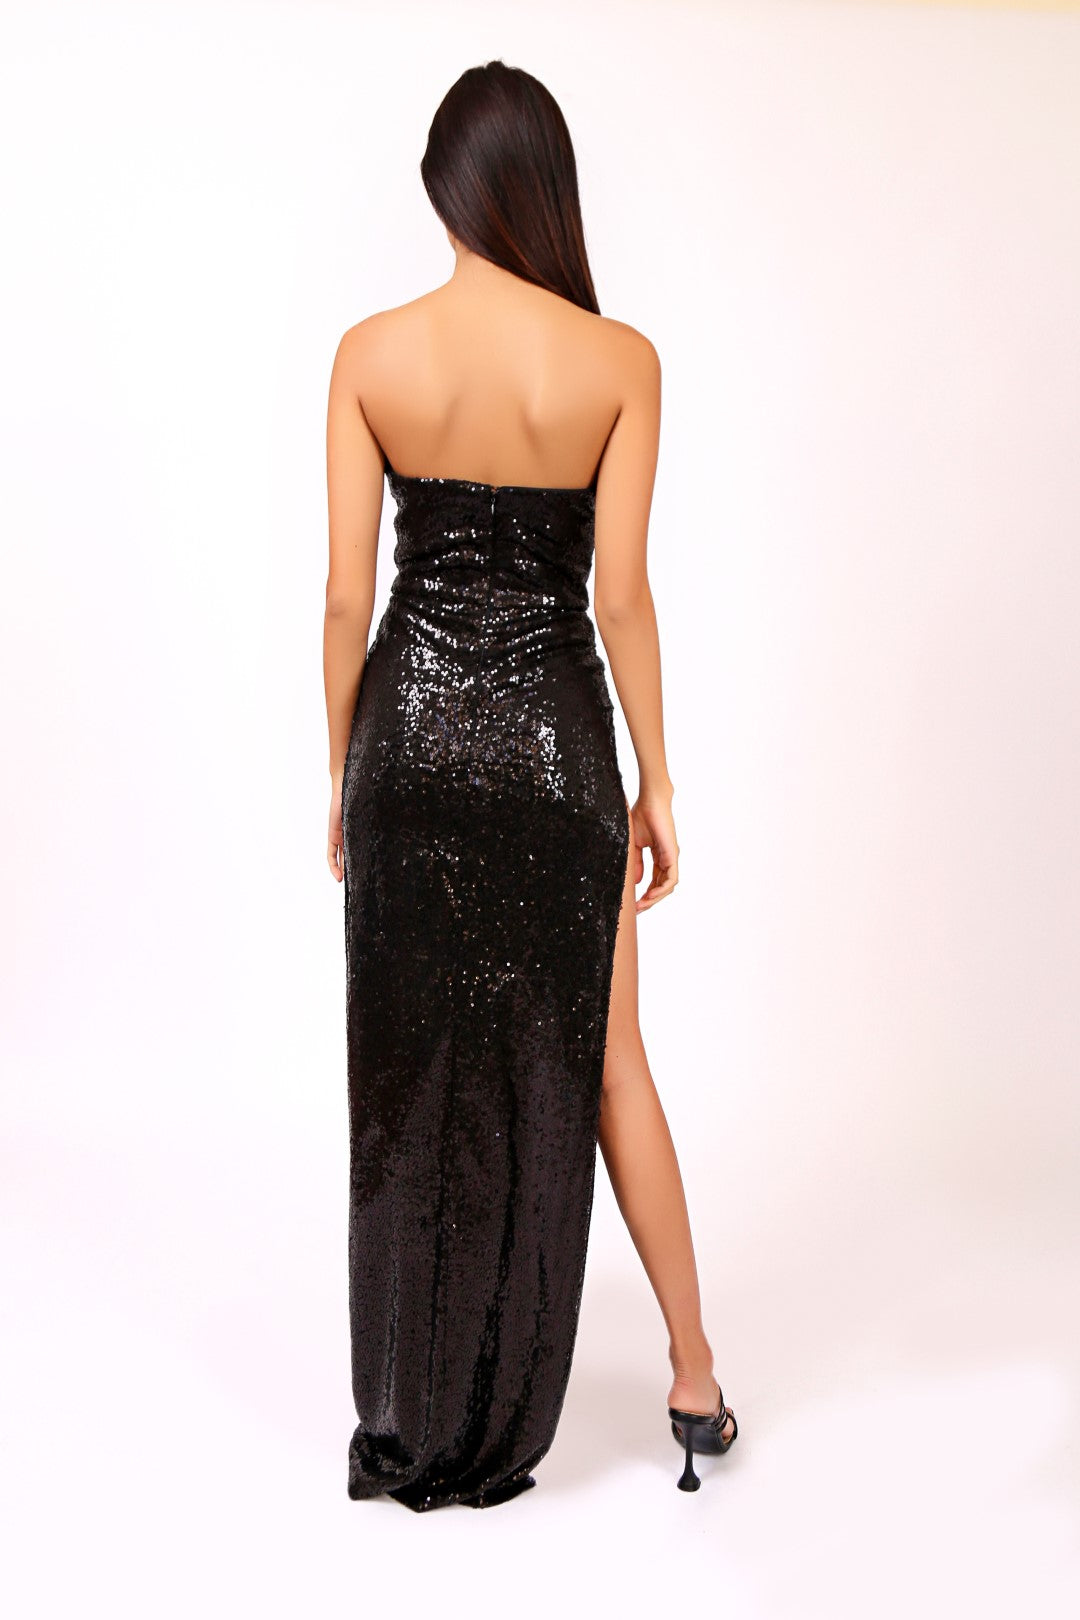 Strapless Dress with Side Slits